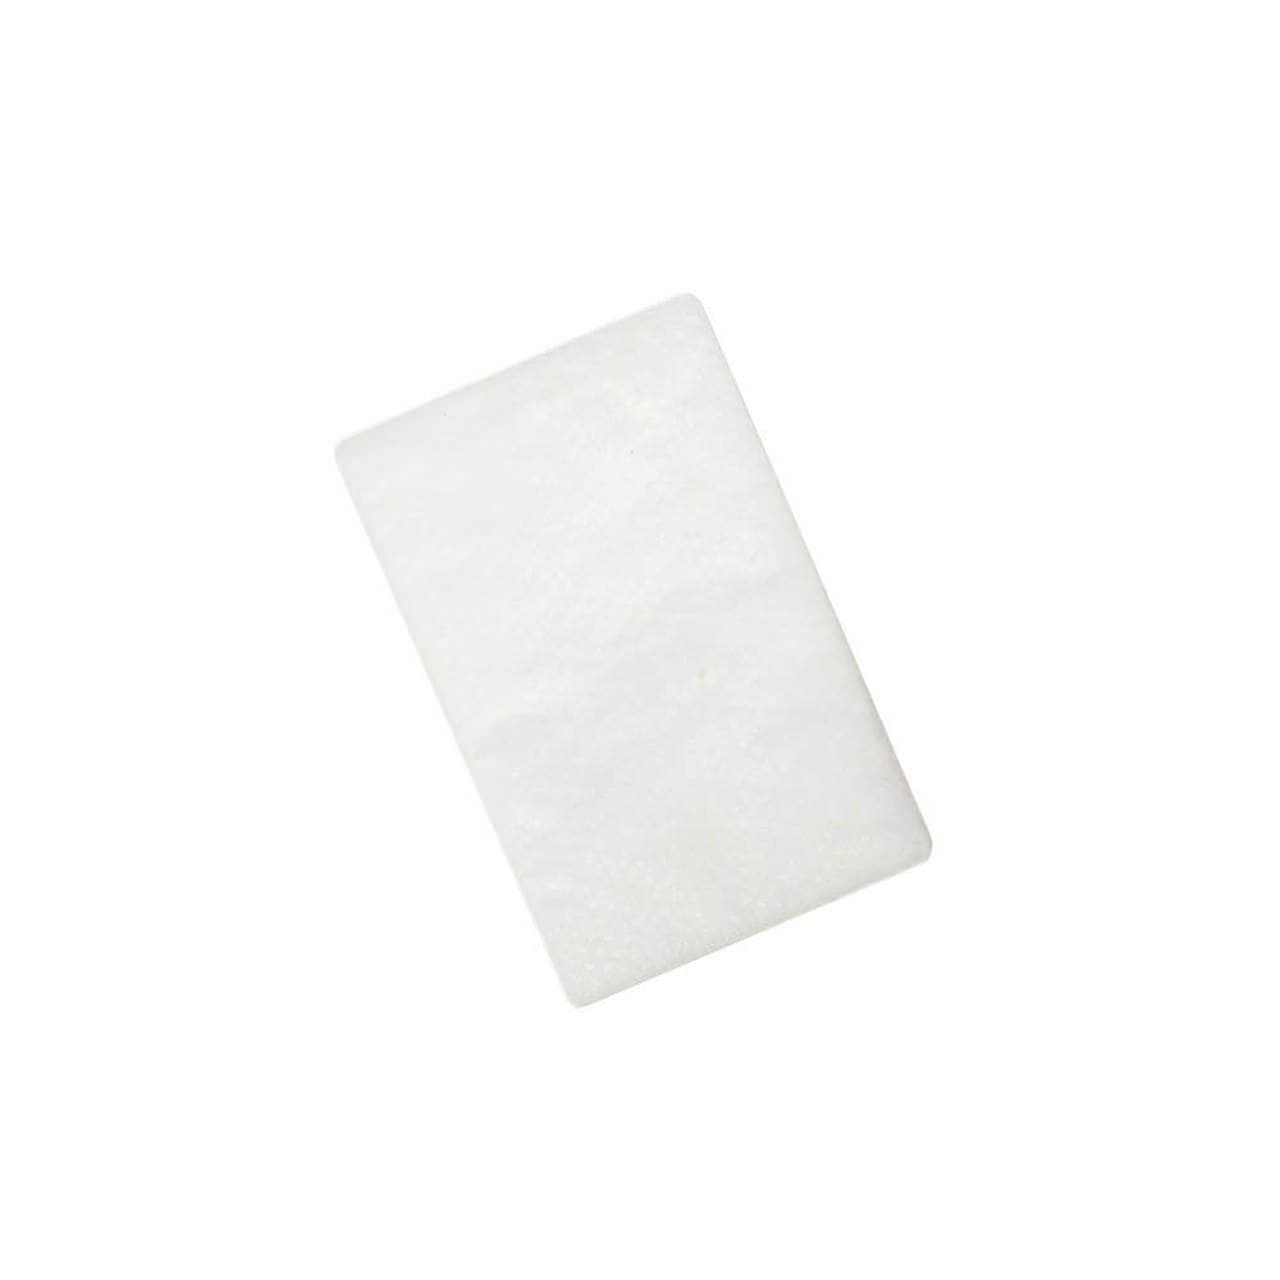 Filters for ResMed S9™ and AirSense™ 10  - 2 pack